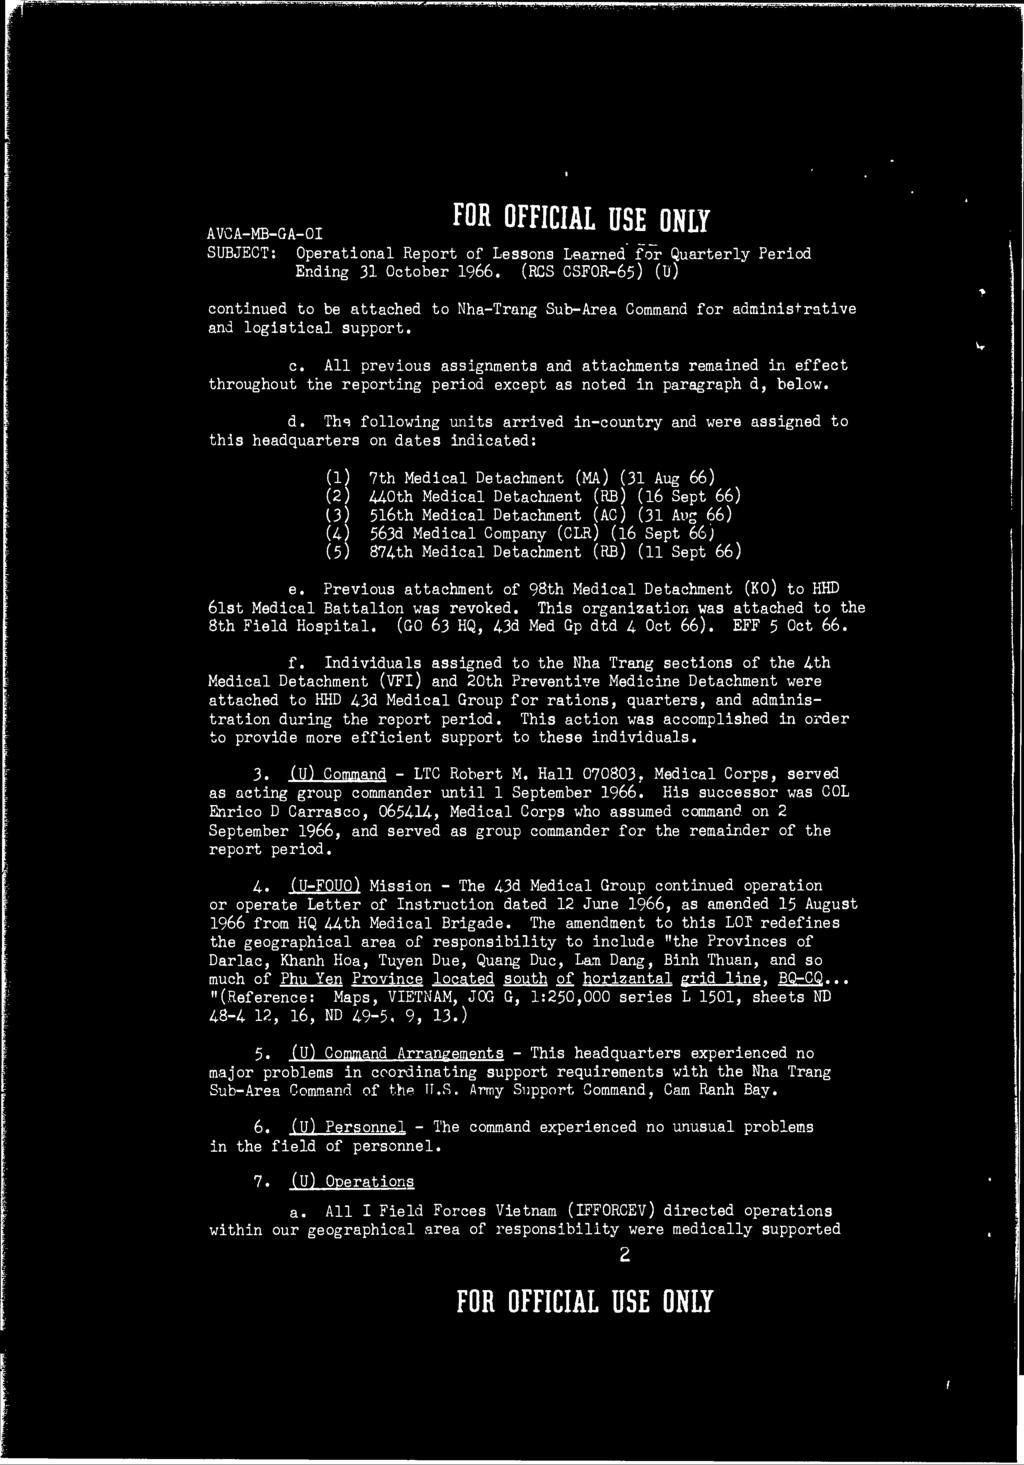 U1,ljl AVCA-MB-GA-OI M ***** uulj SUBJECT: Operational Report of Lessons Learned for Quarterly Period Ending 31 October 1966.